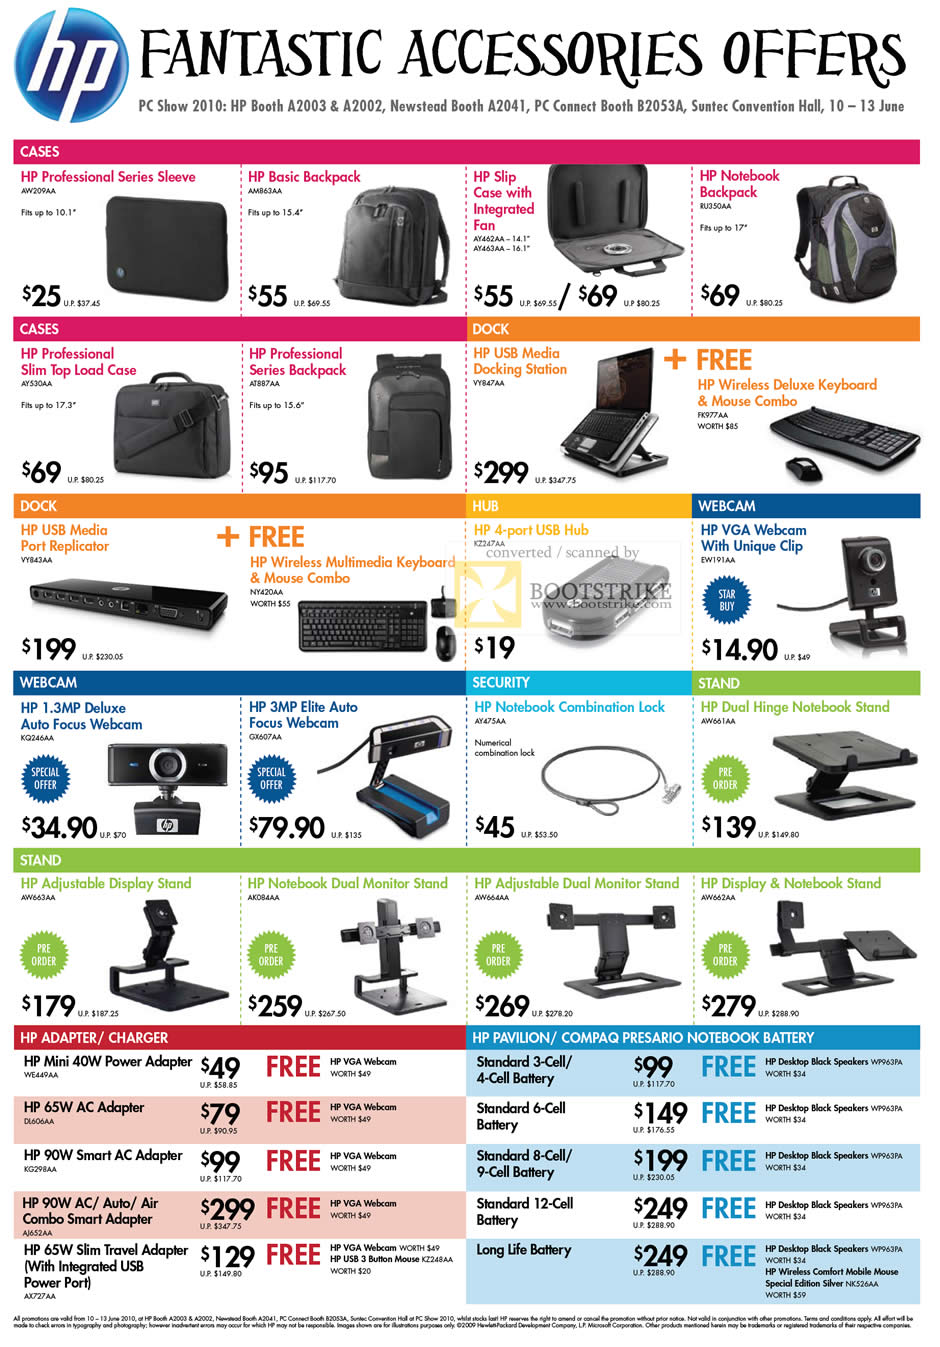 PC Show 2010 price list image brochure of HP Accessories Sleeve Backpack Docking Keyboard Webcam Stand Hub Adapter Charger Battery